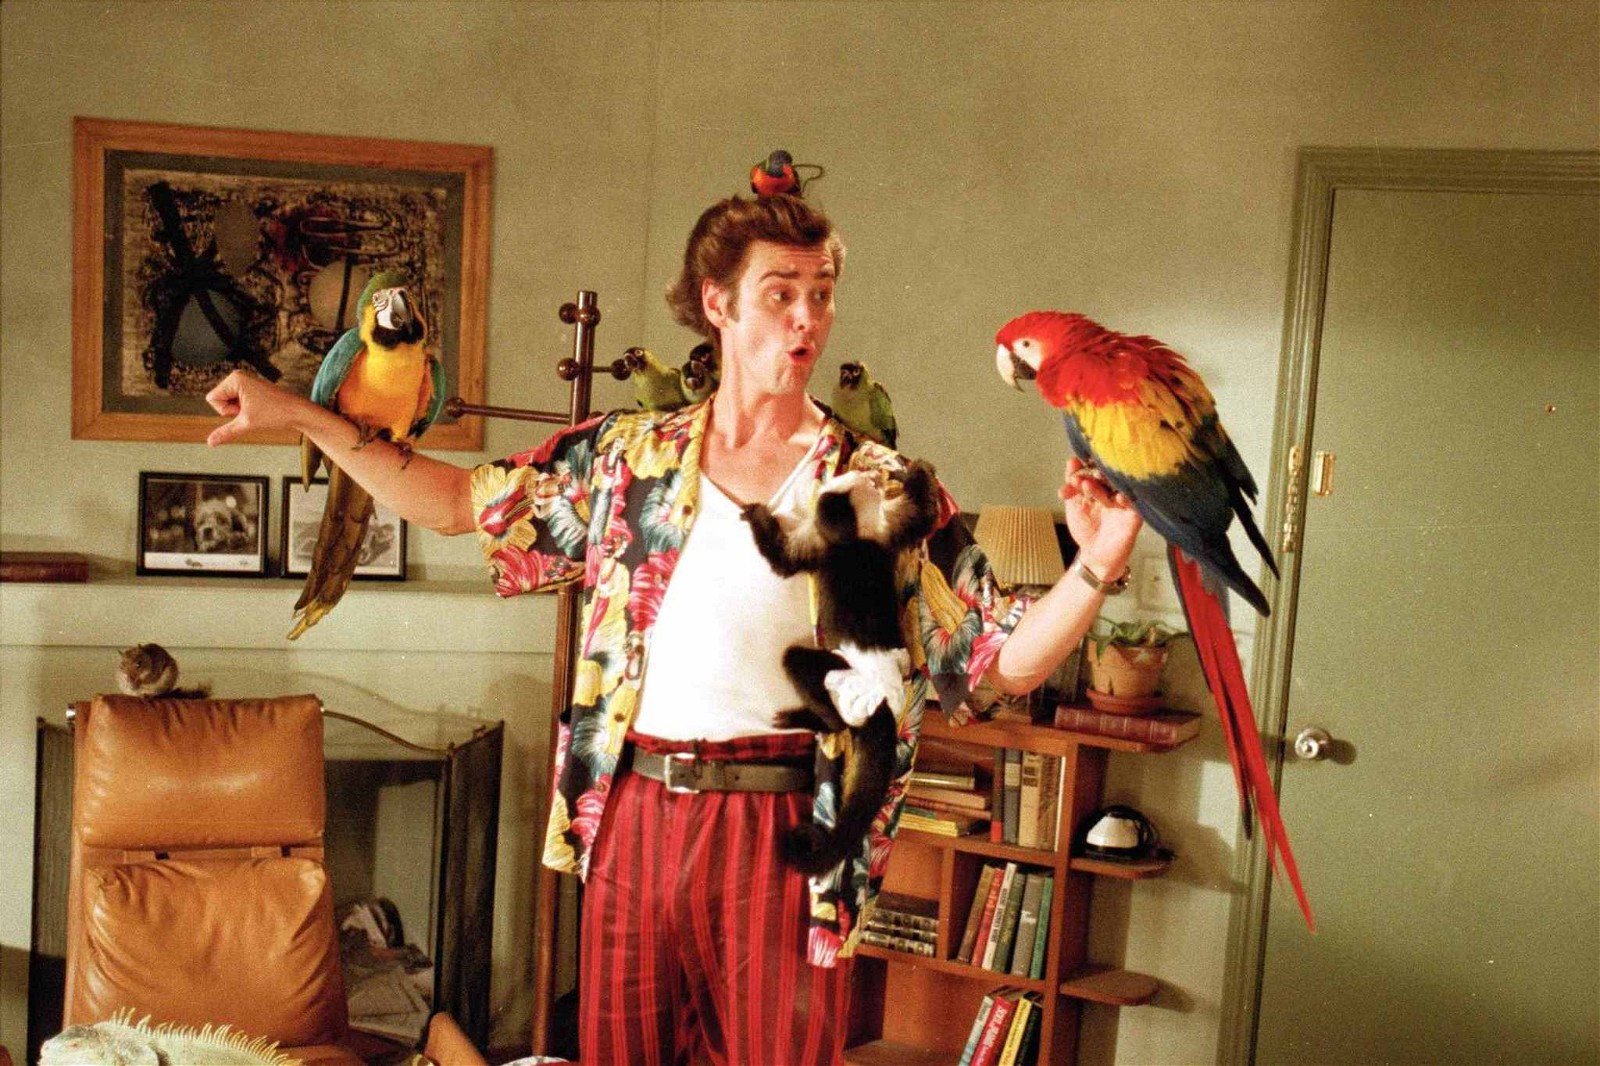 Jim Carrey with his birds in a still from Ace Ventura: Pet Detective